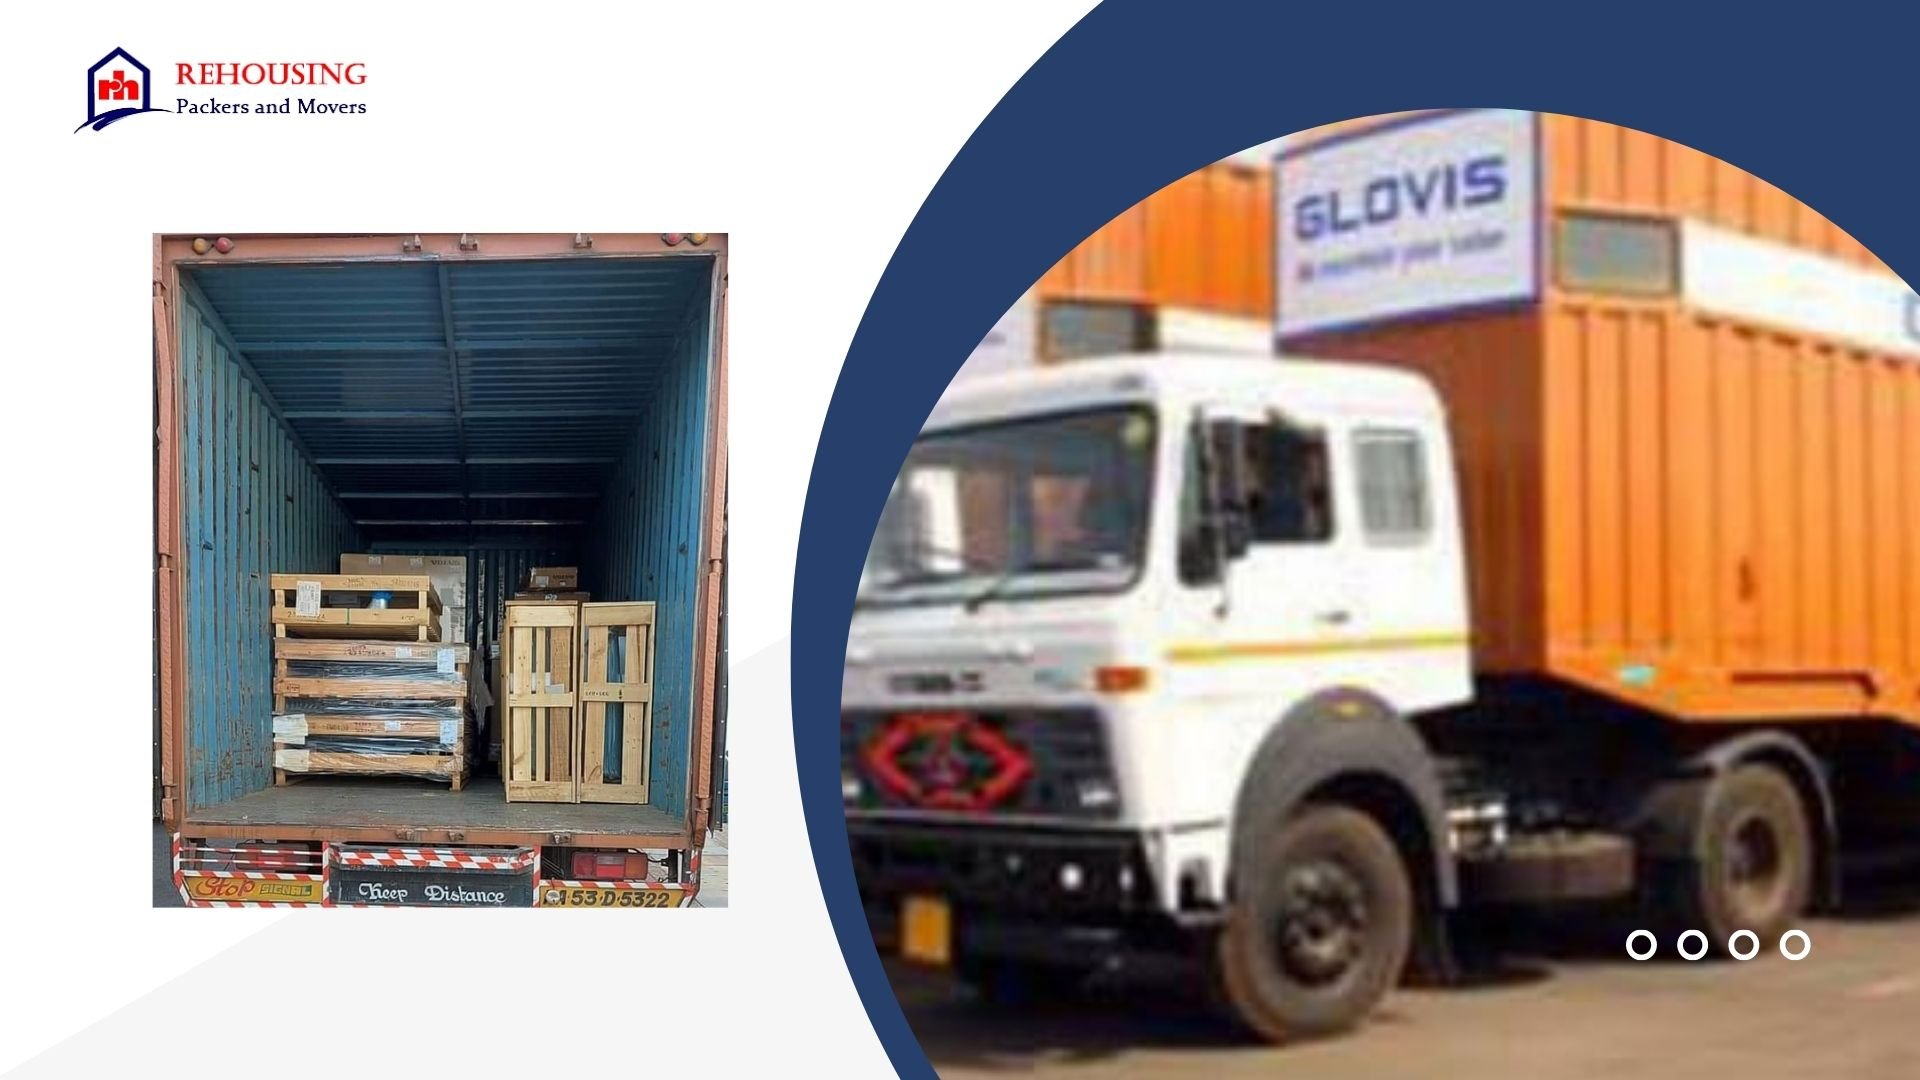 Packers and Movers From Dehradun to Faridabad | Rehousing packers and movers